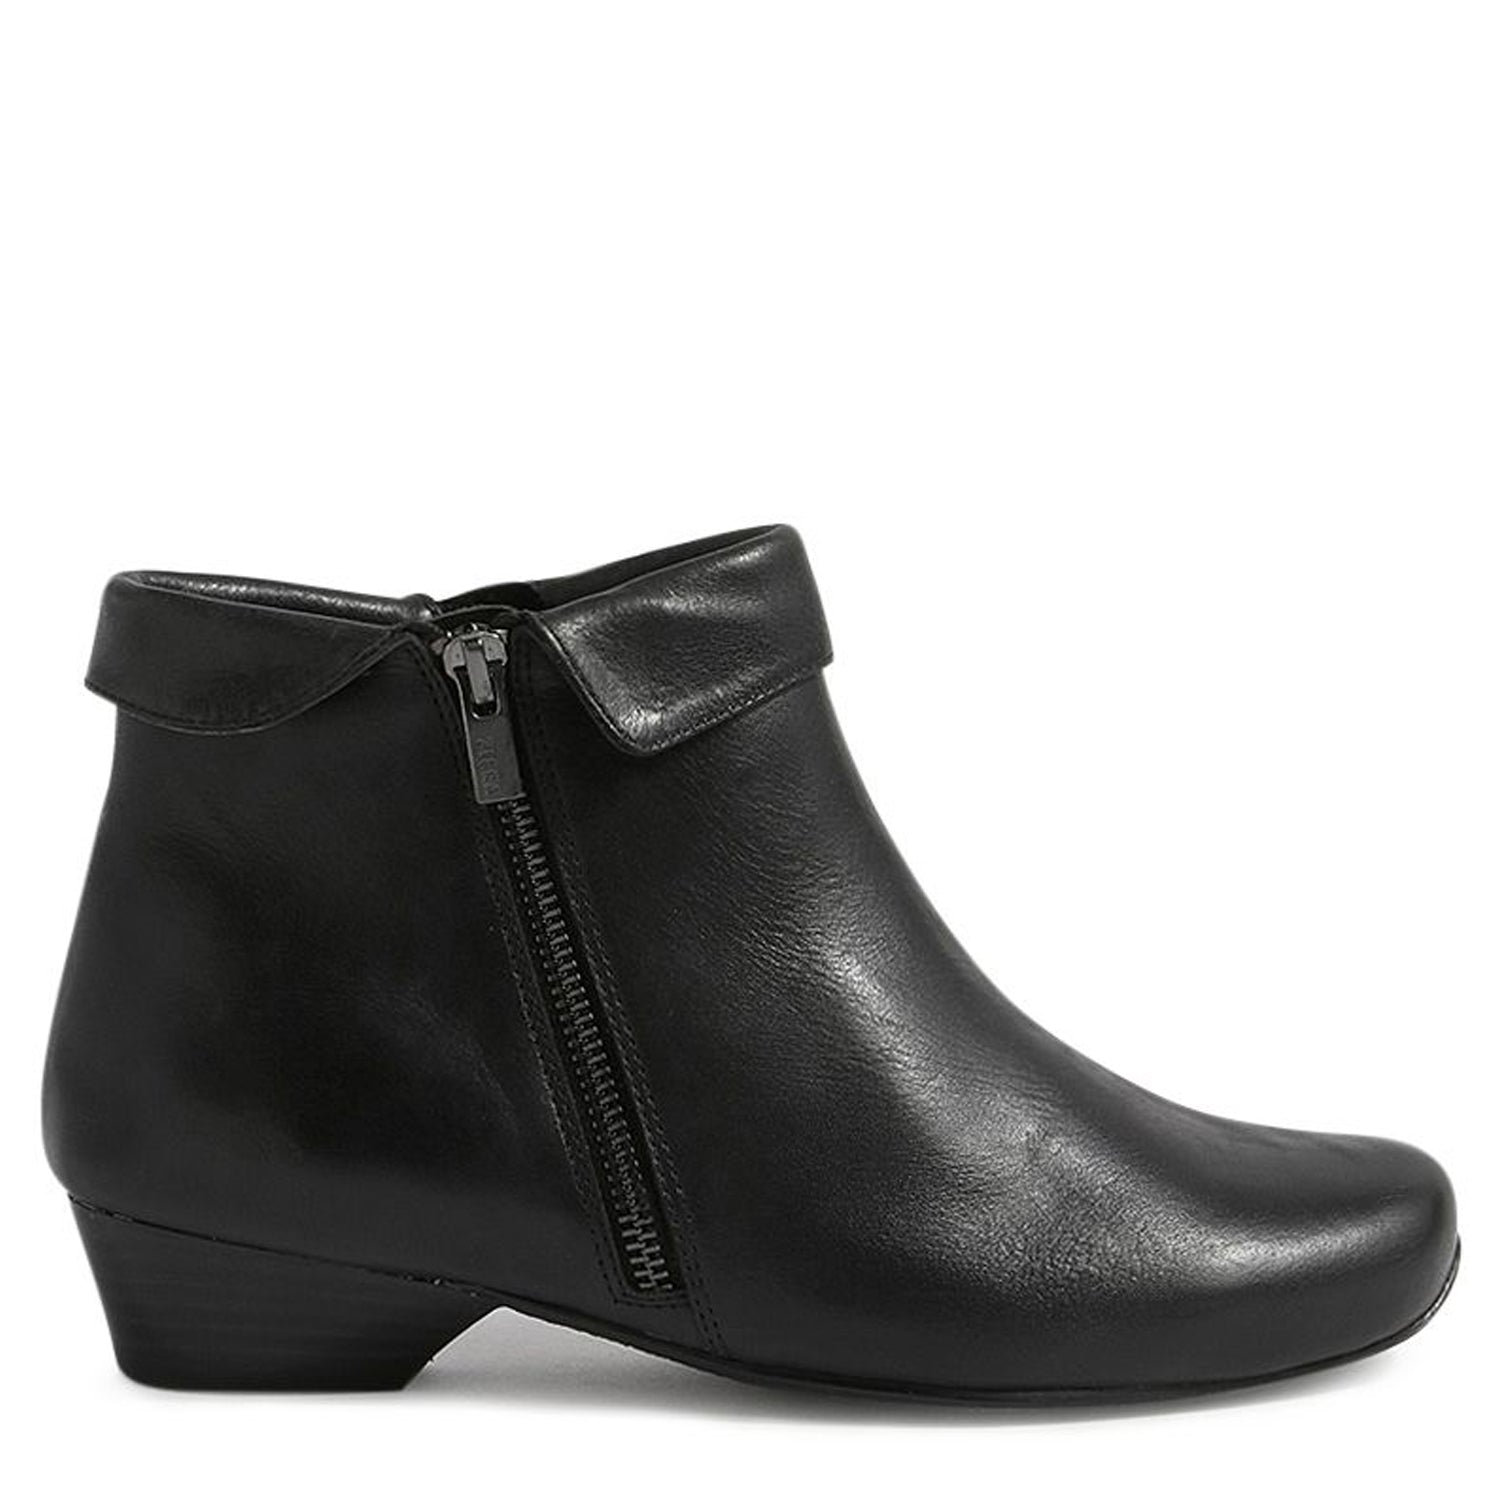 Shop CATHAL XW - BLACK LEATHER by ZIERA - Ian's Shoes for Women